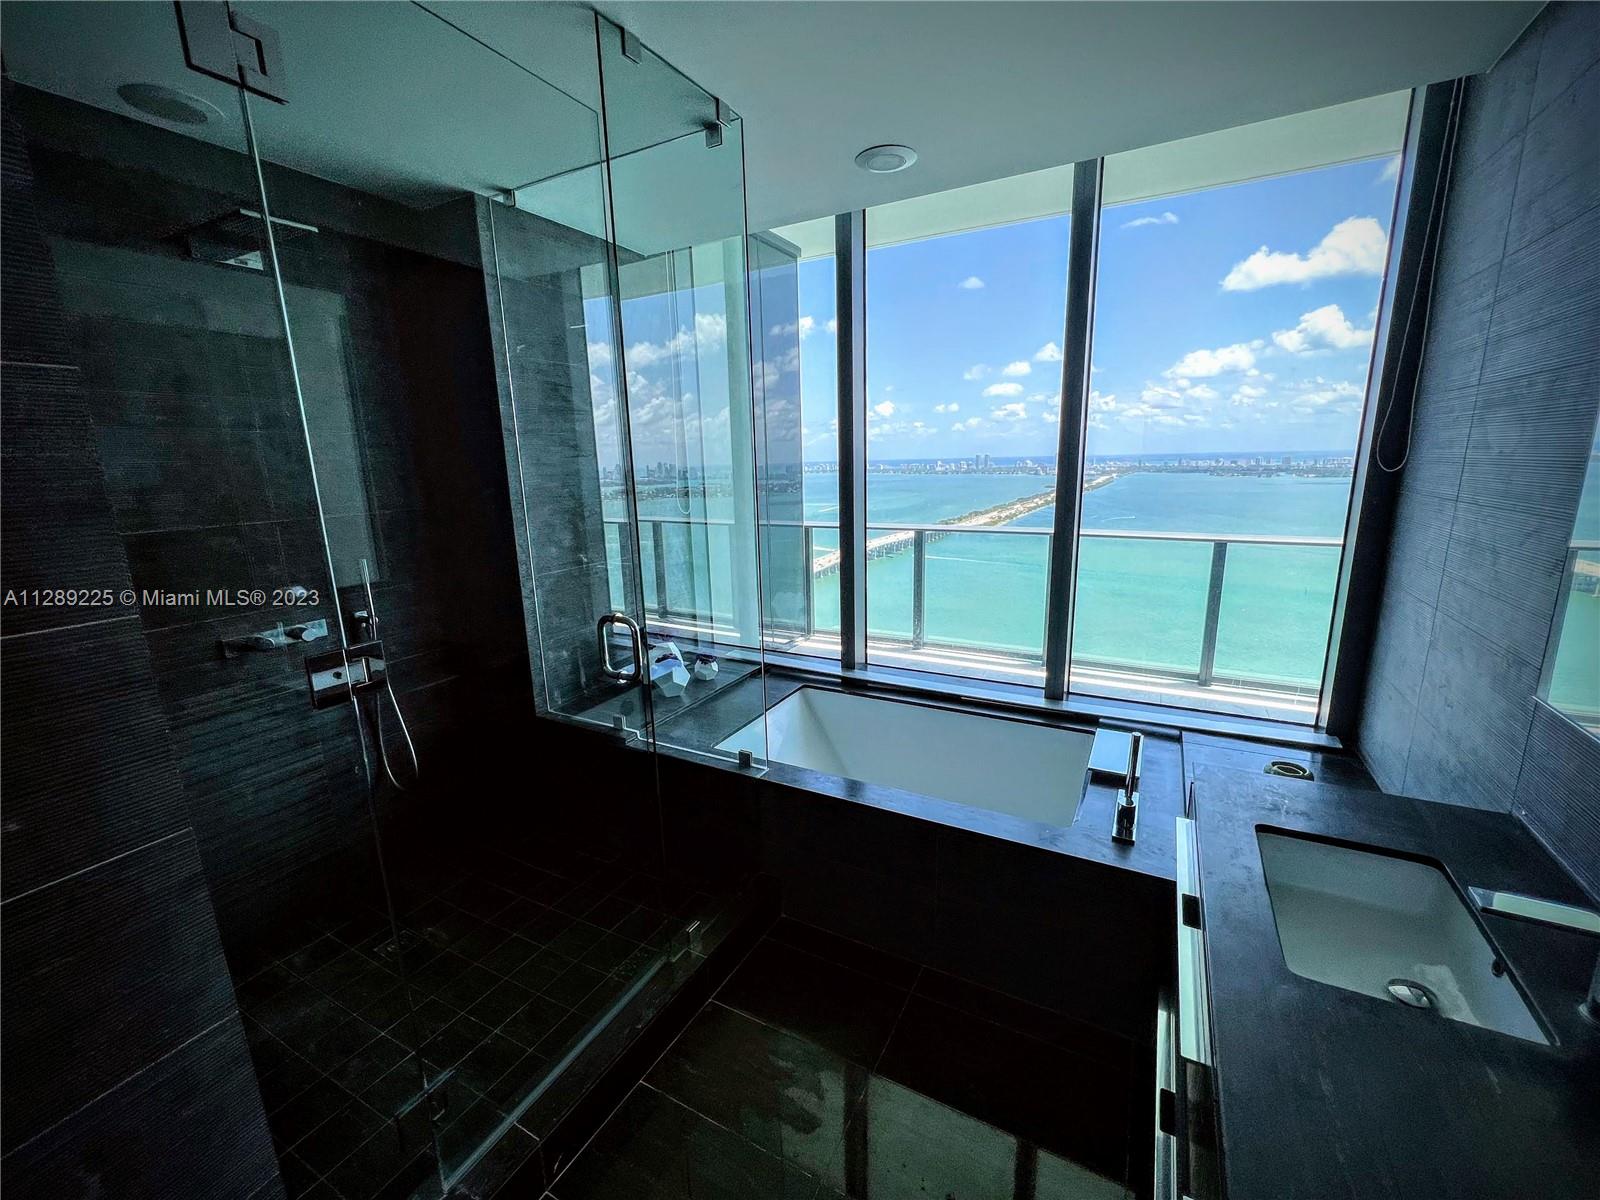 Bathrooms with amazing views